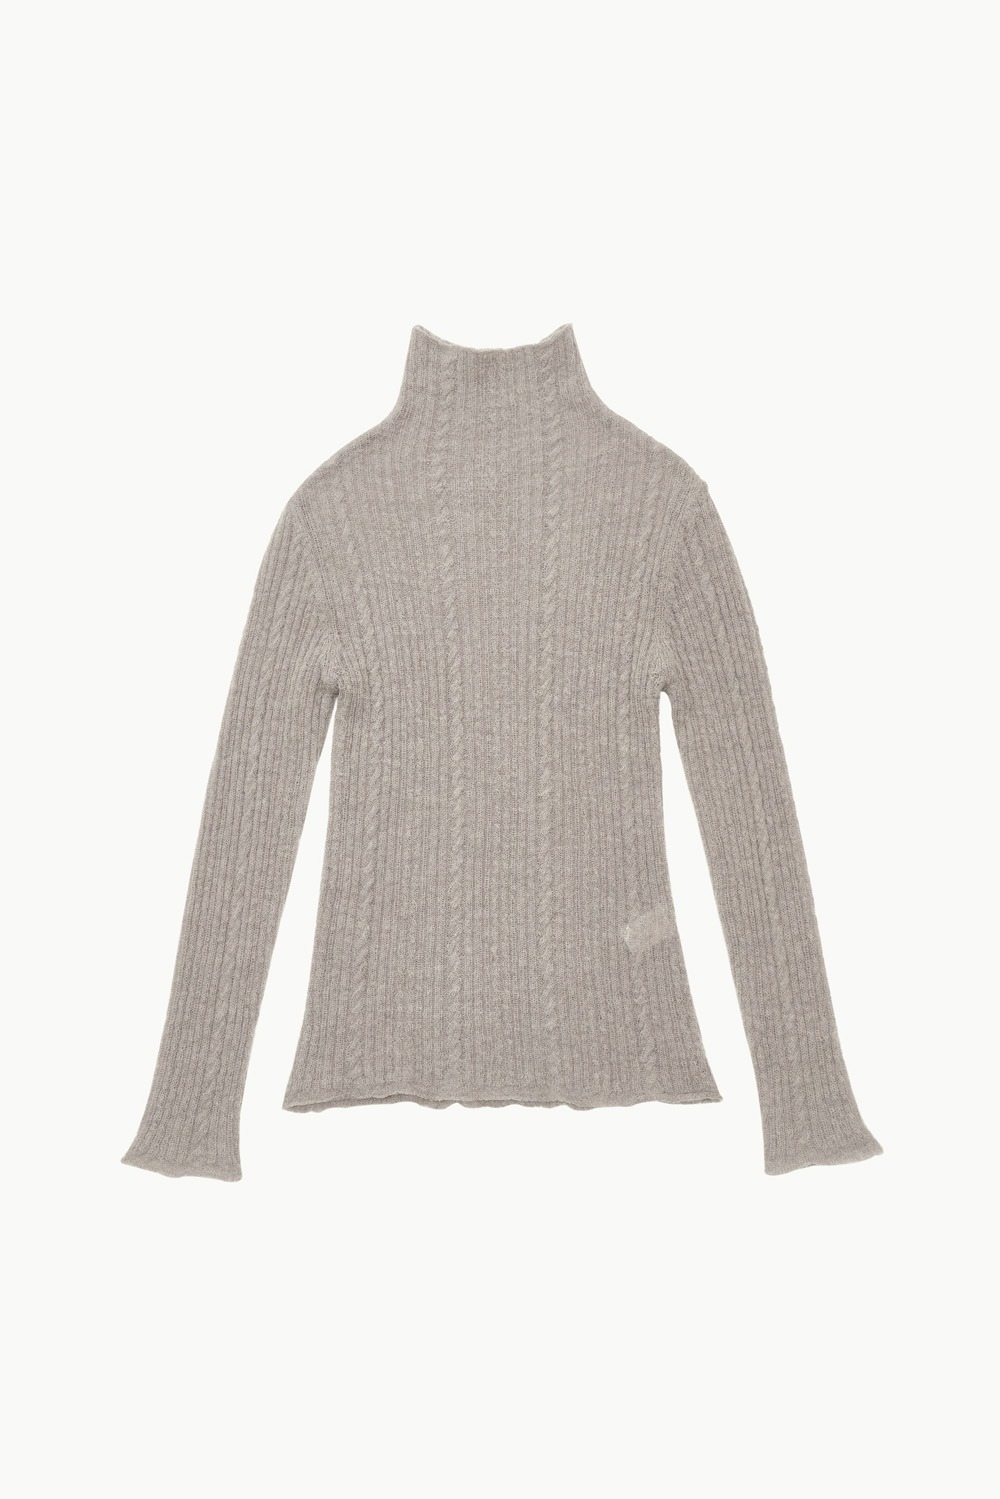 Sheer Turtle Neck Pullover - Charcoal